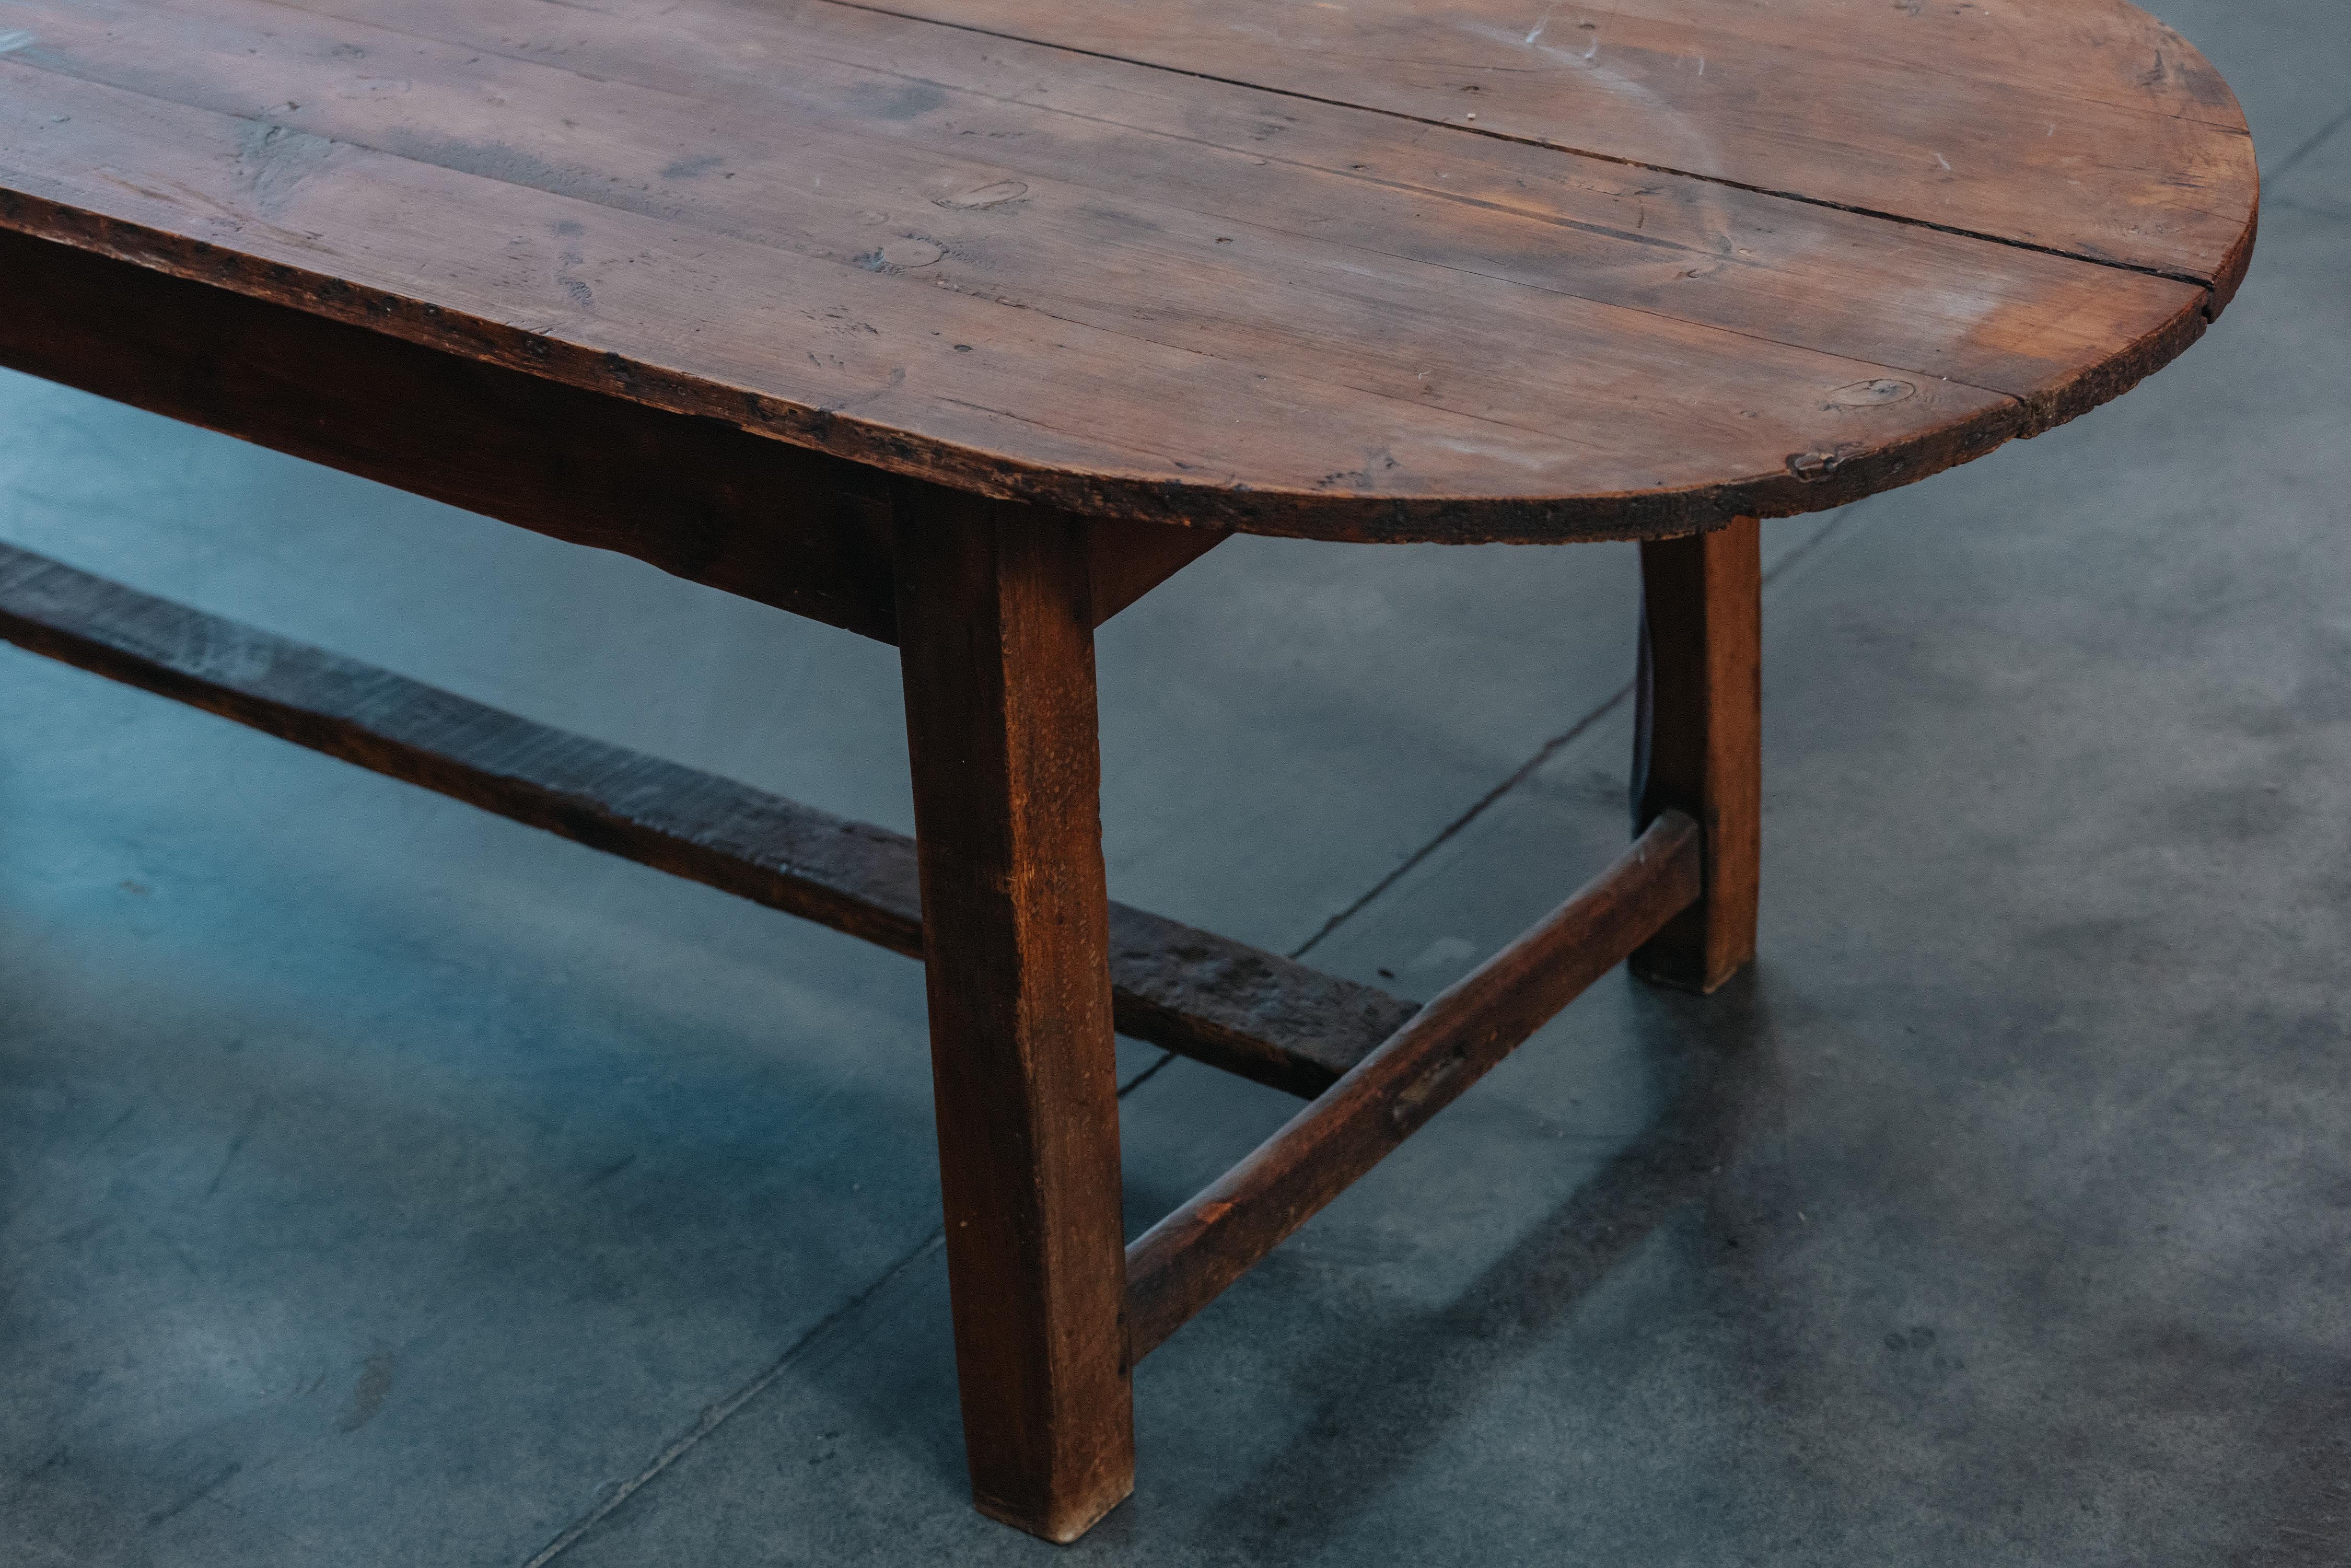 Early 20th Century Large Pine Farm Table From France, Circa 1900